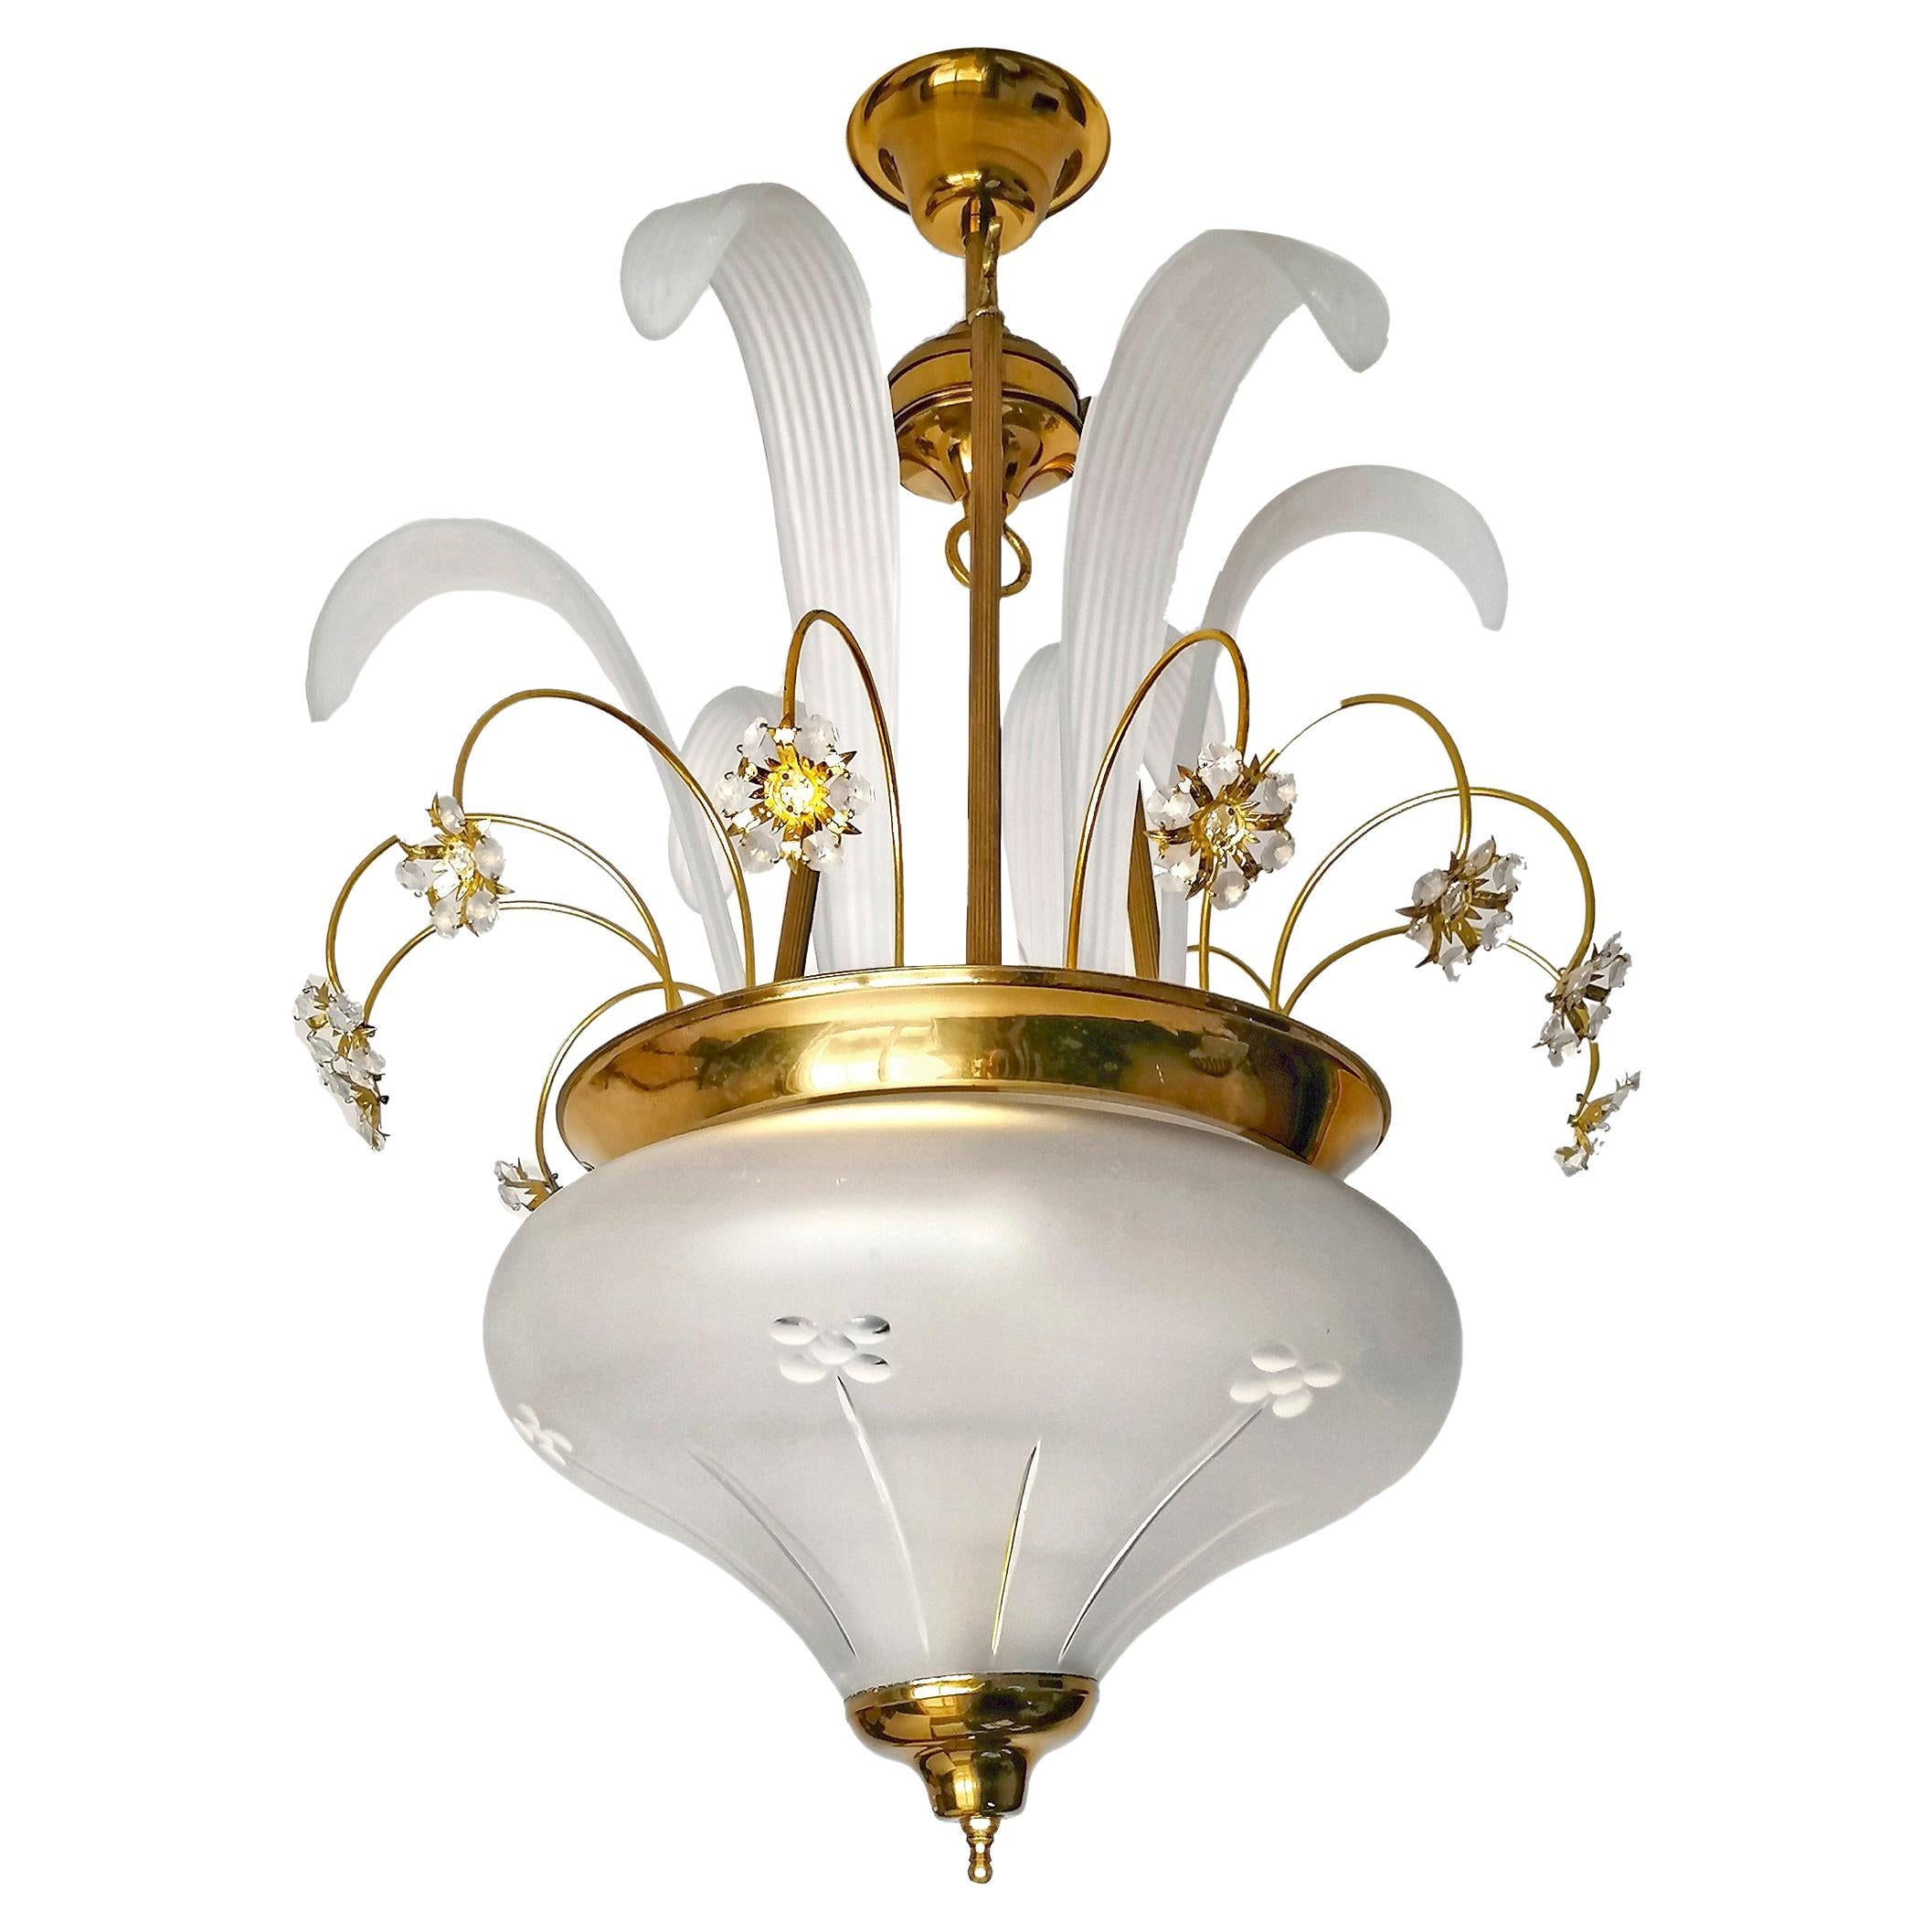 Fabulous Hollywood Regency Murano crystal glass flower bouquet & gilt brass chandelier
Dimensions
Height: 31.5 in. (80 cm)
Diameter: 19.69 in. (50 cm)
3 light bulbs E27/ good working condition
Assembly required.